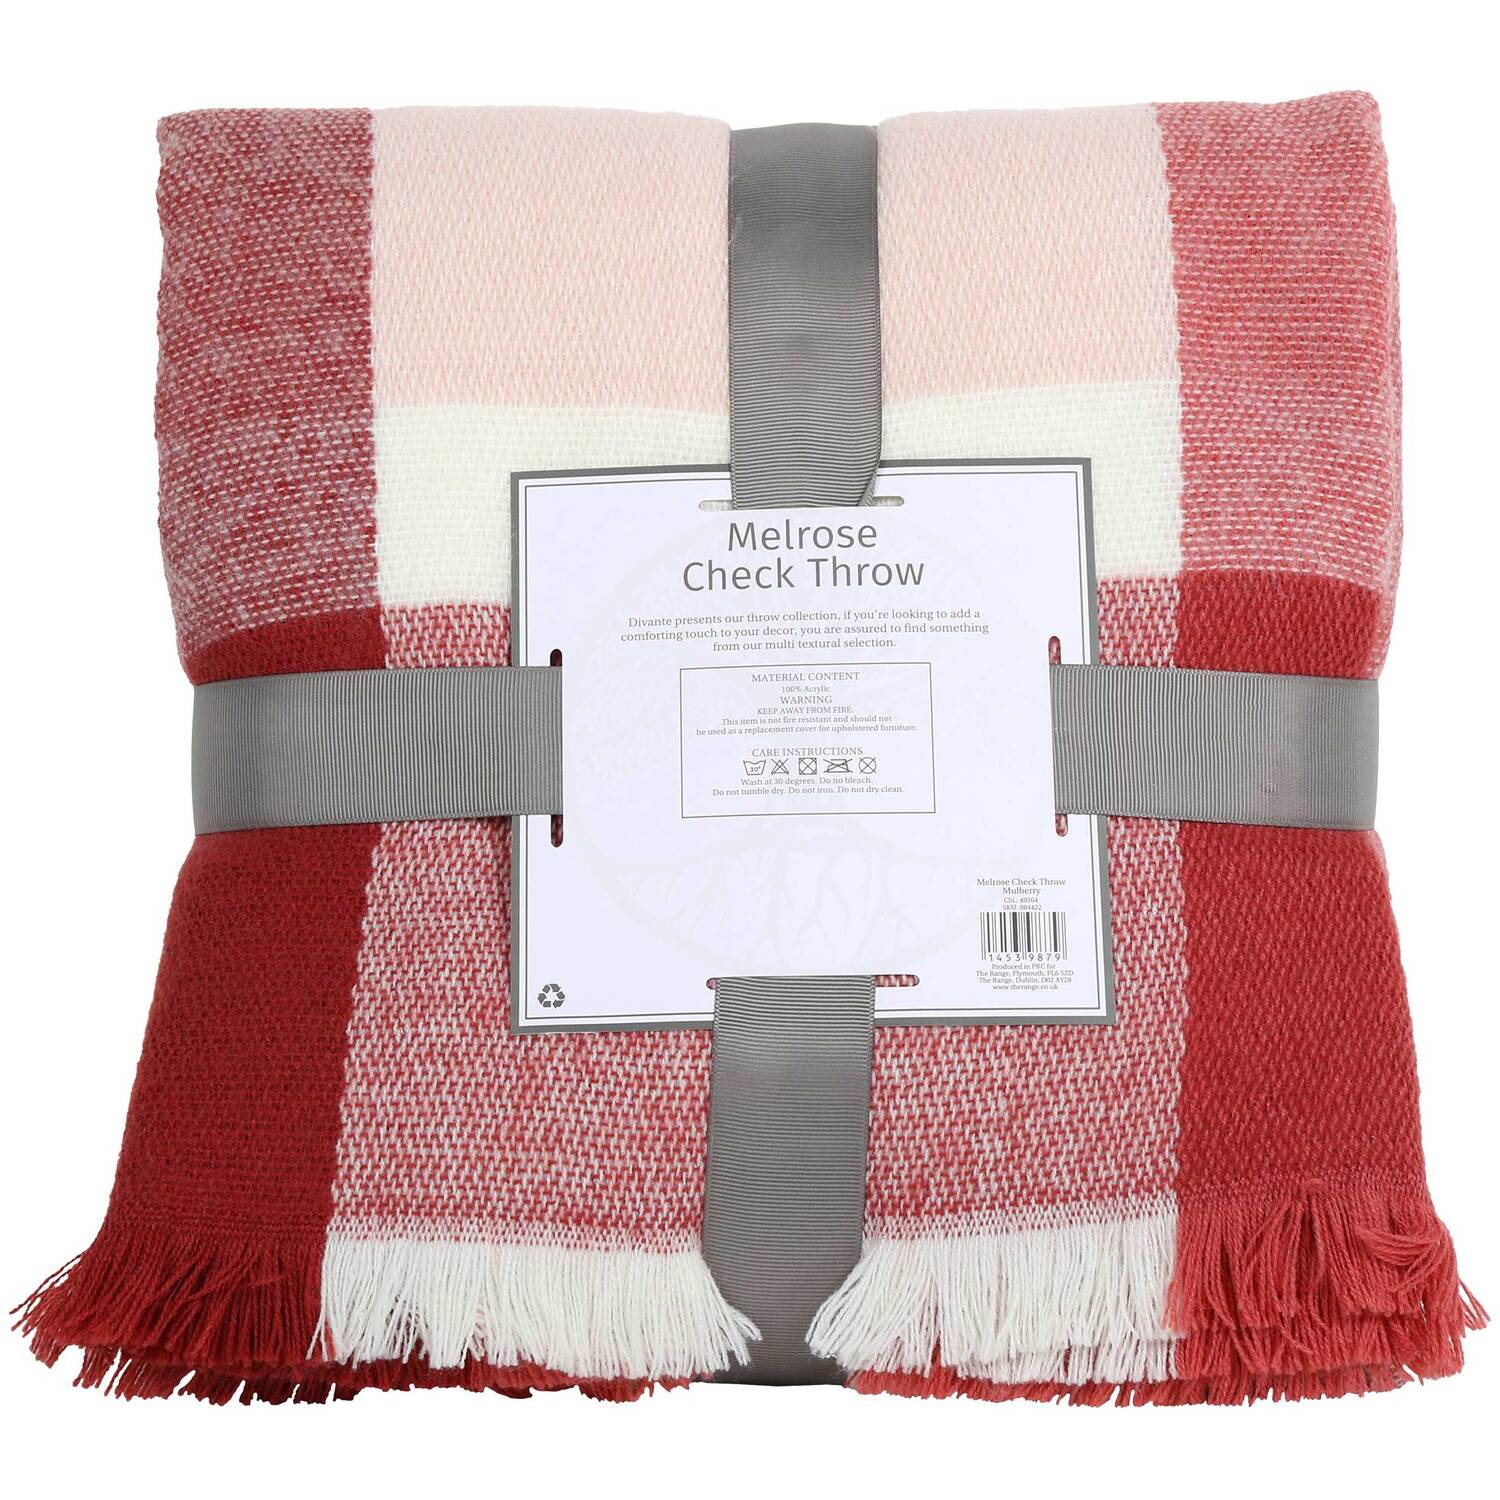 Melrose Check Throw - Mulberry Image 2